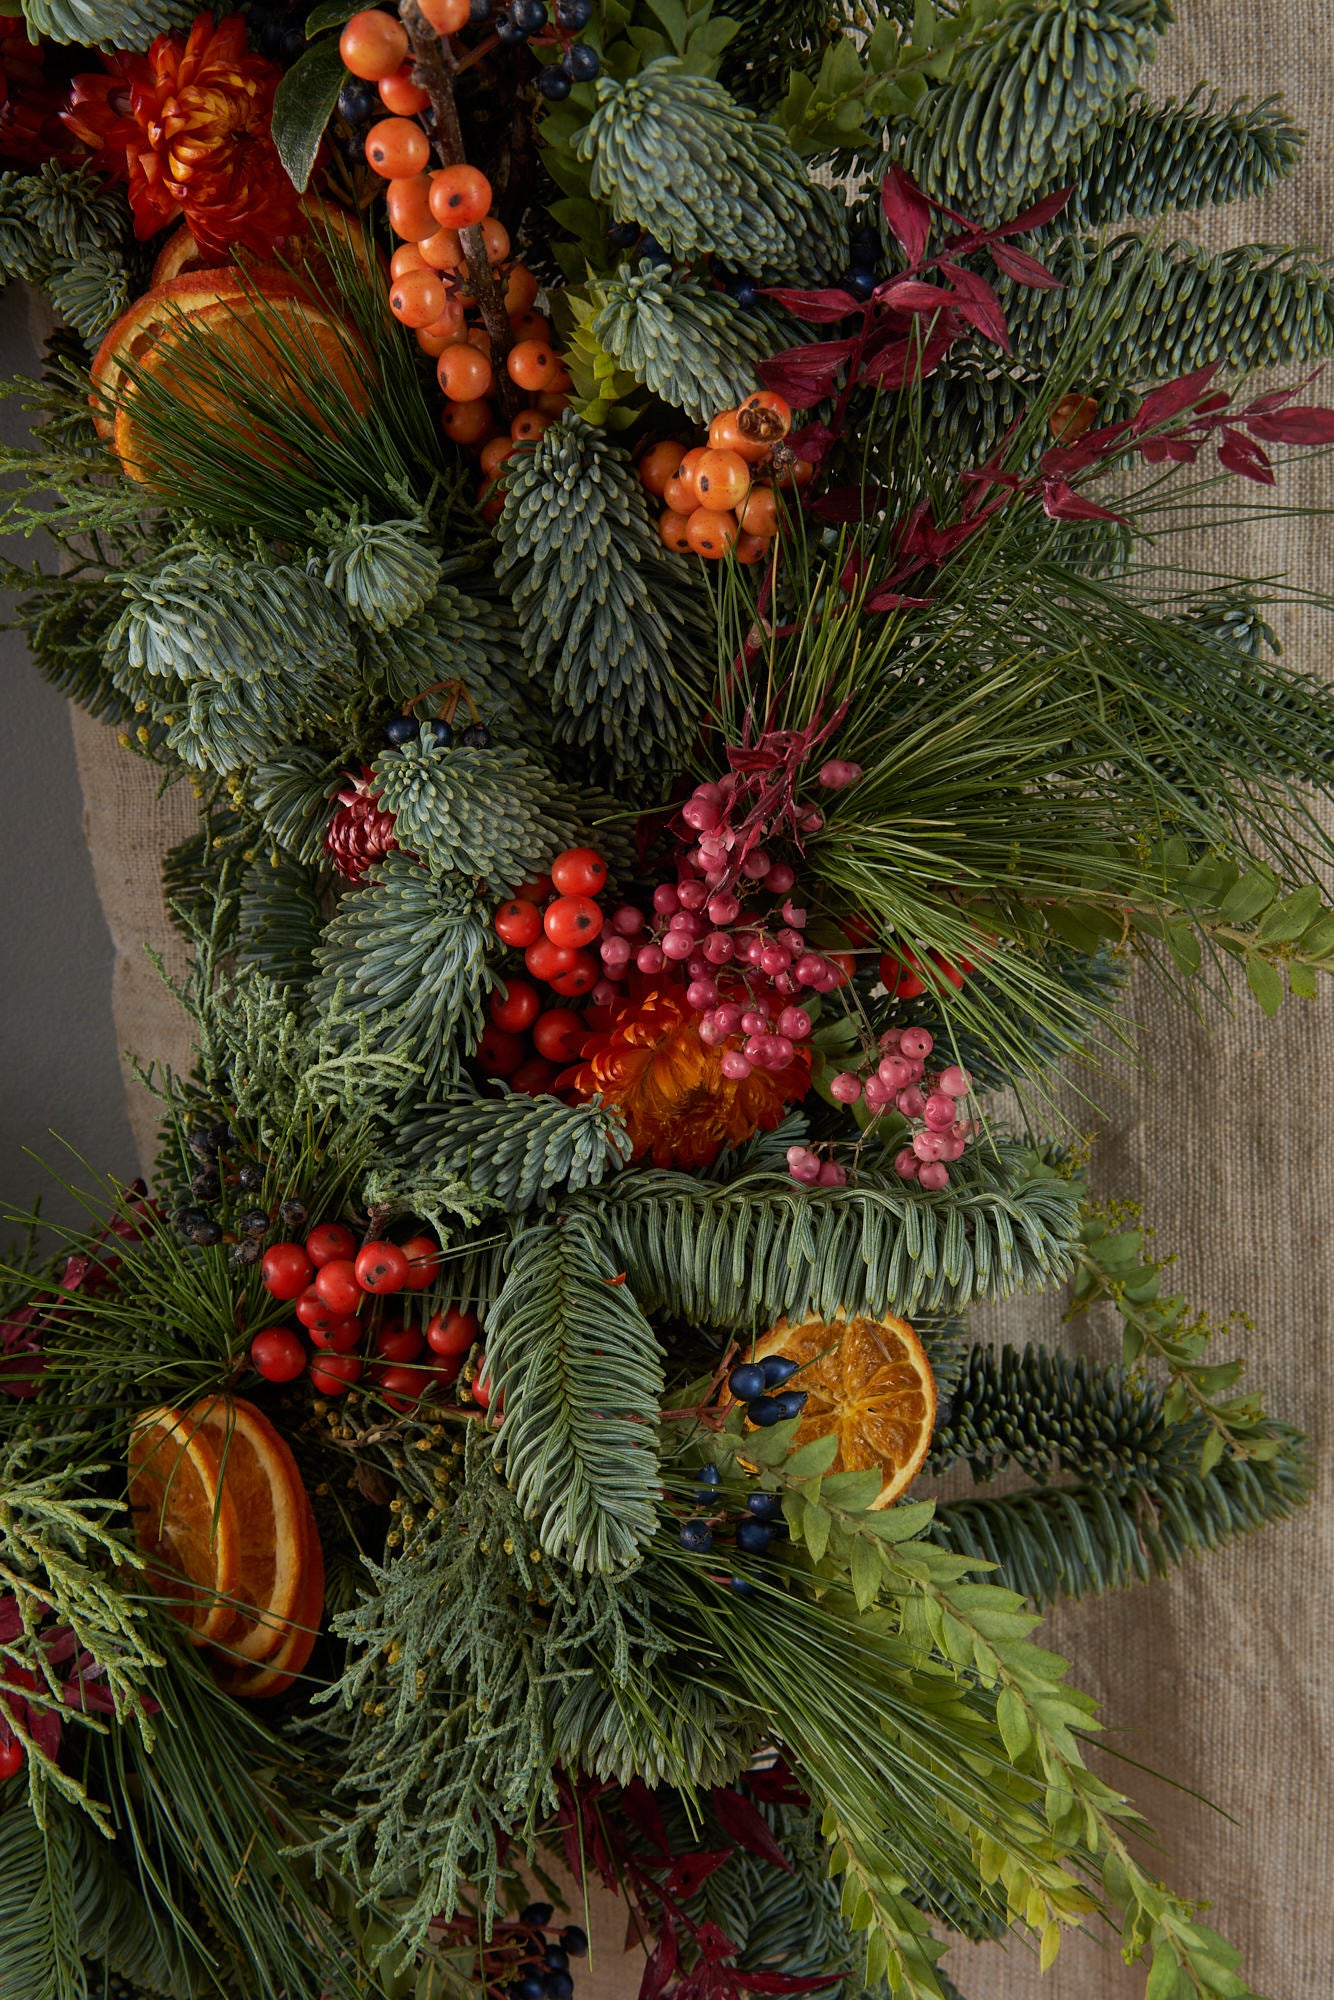 Christmas wreath with dried orange, red berries and dried flowers arranged in a contemporary modern style by Botanique Workshop London